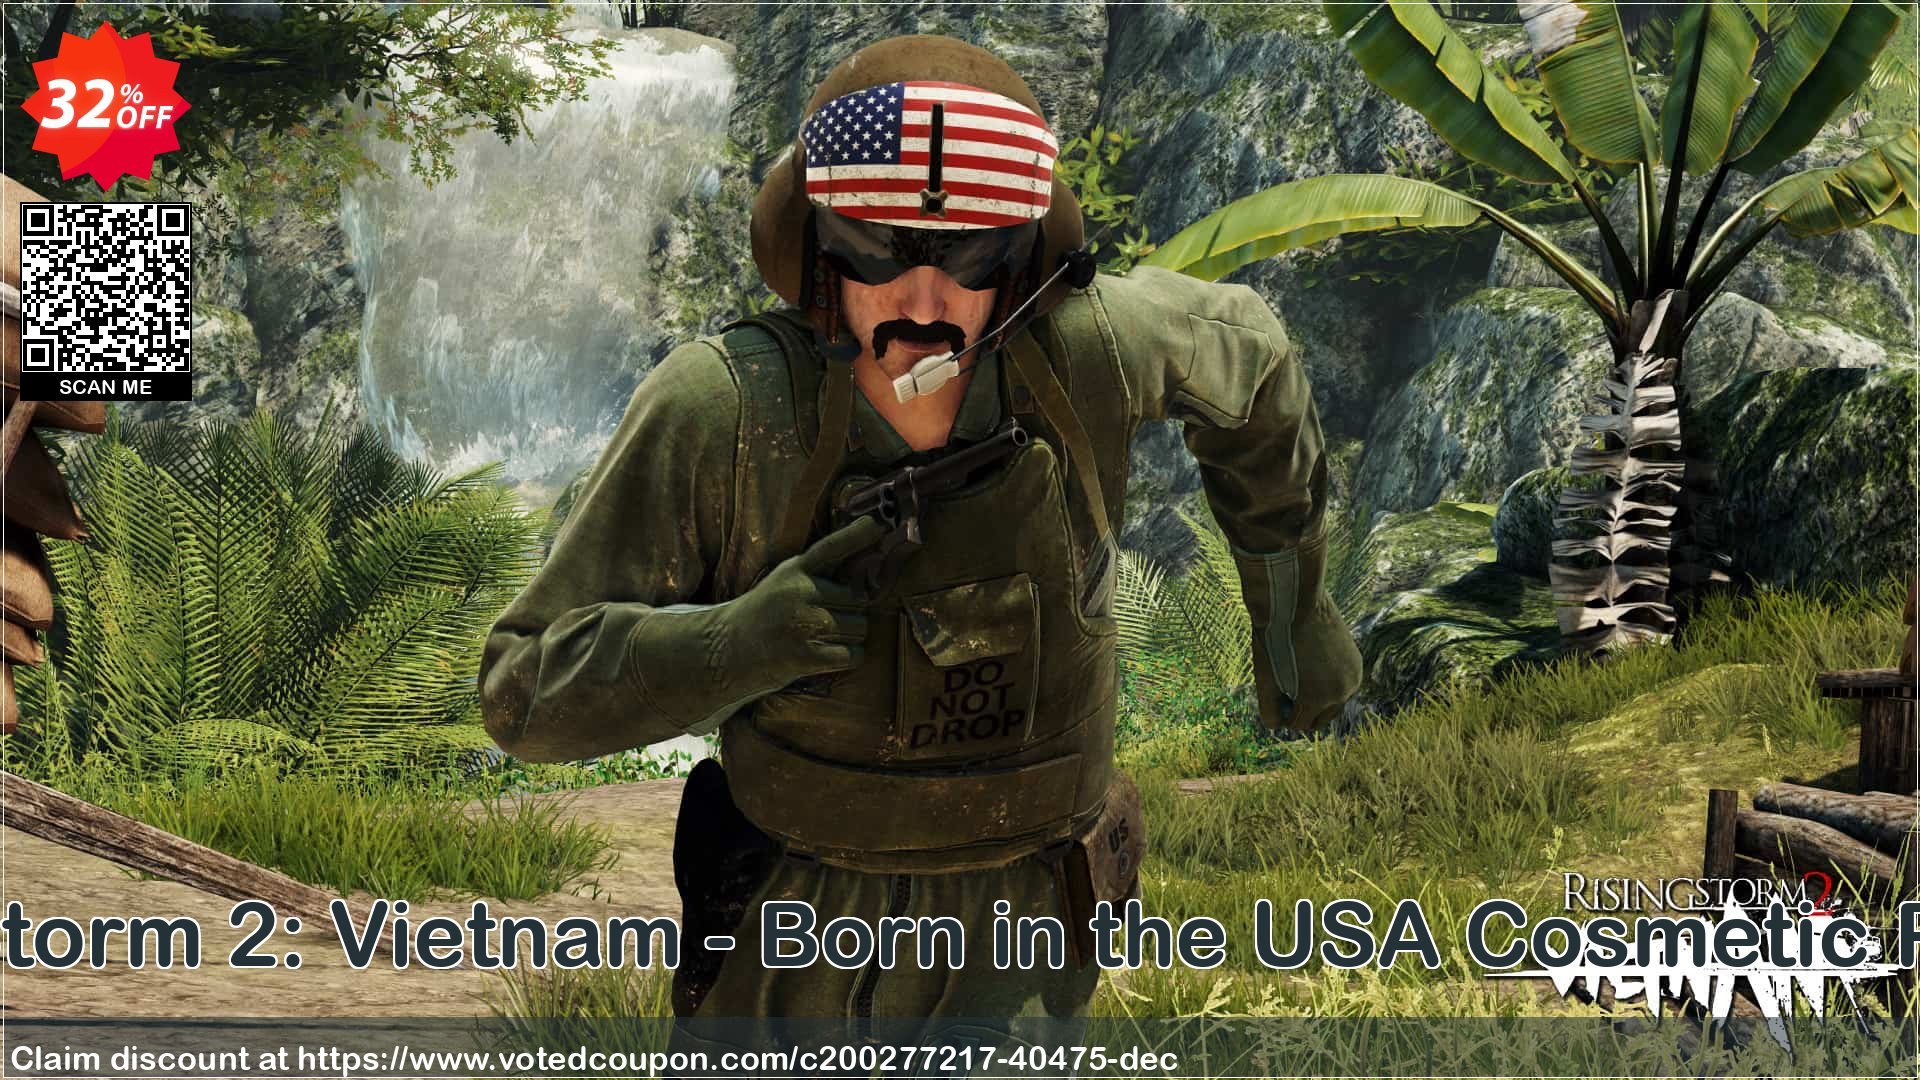 Rising Storm 2: Vietnam - Born in the USA Cosmetic PC - DLC Coupon Code May 2024, 32% OFF - VotedCoupon